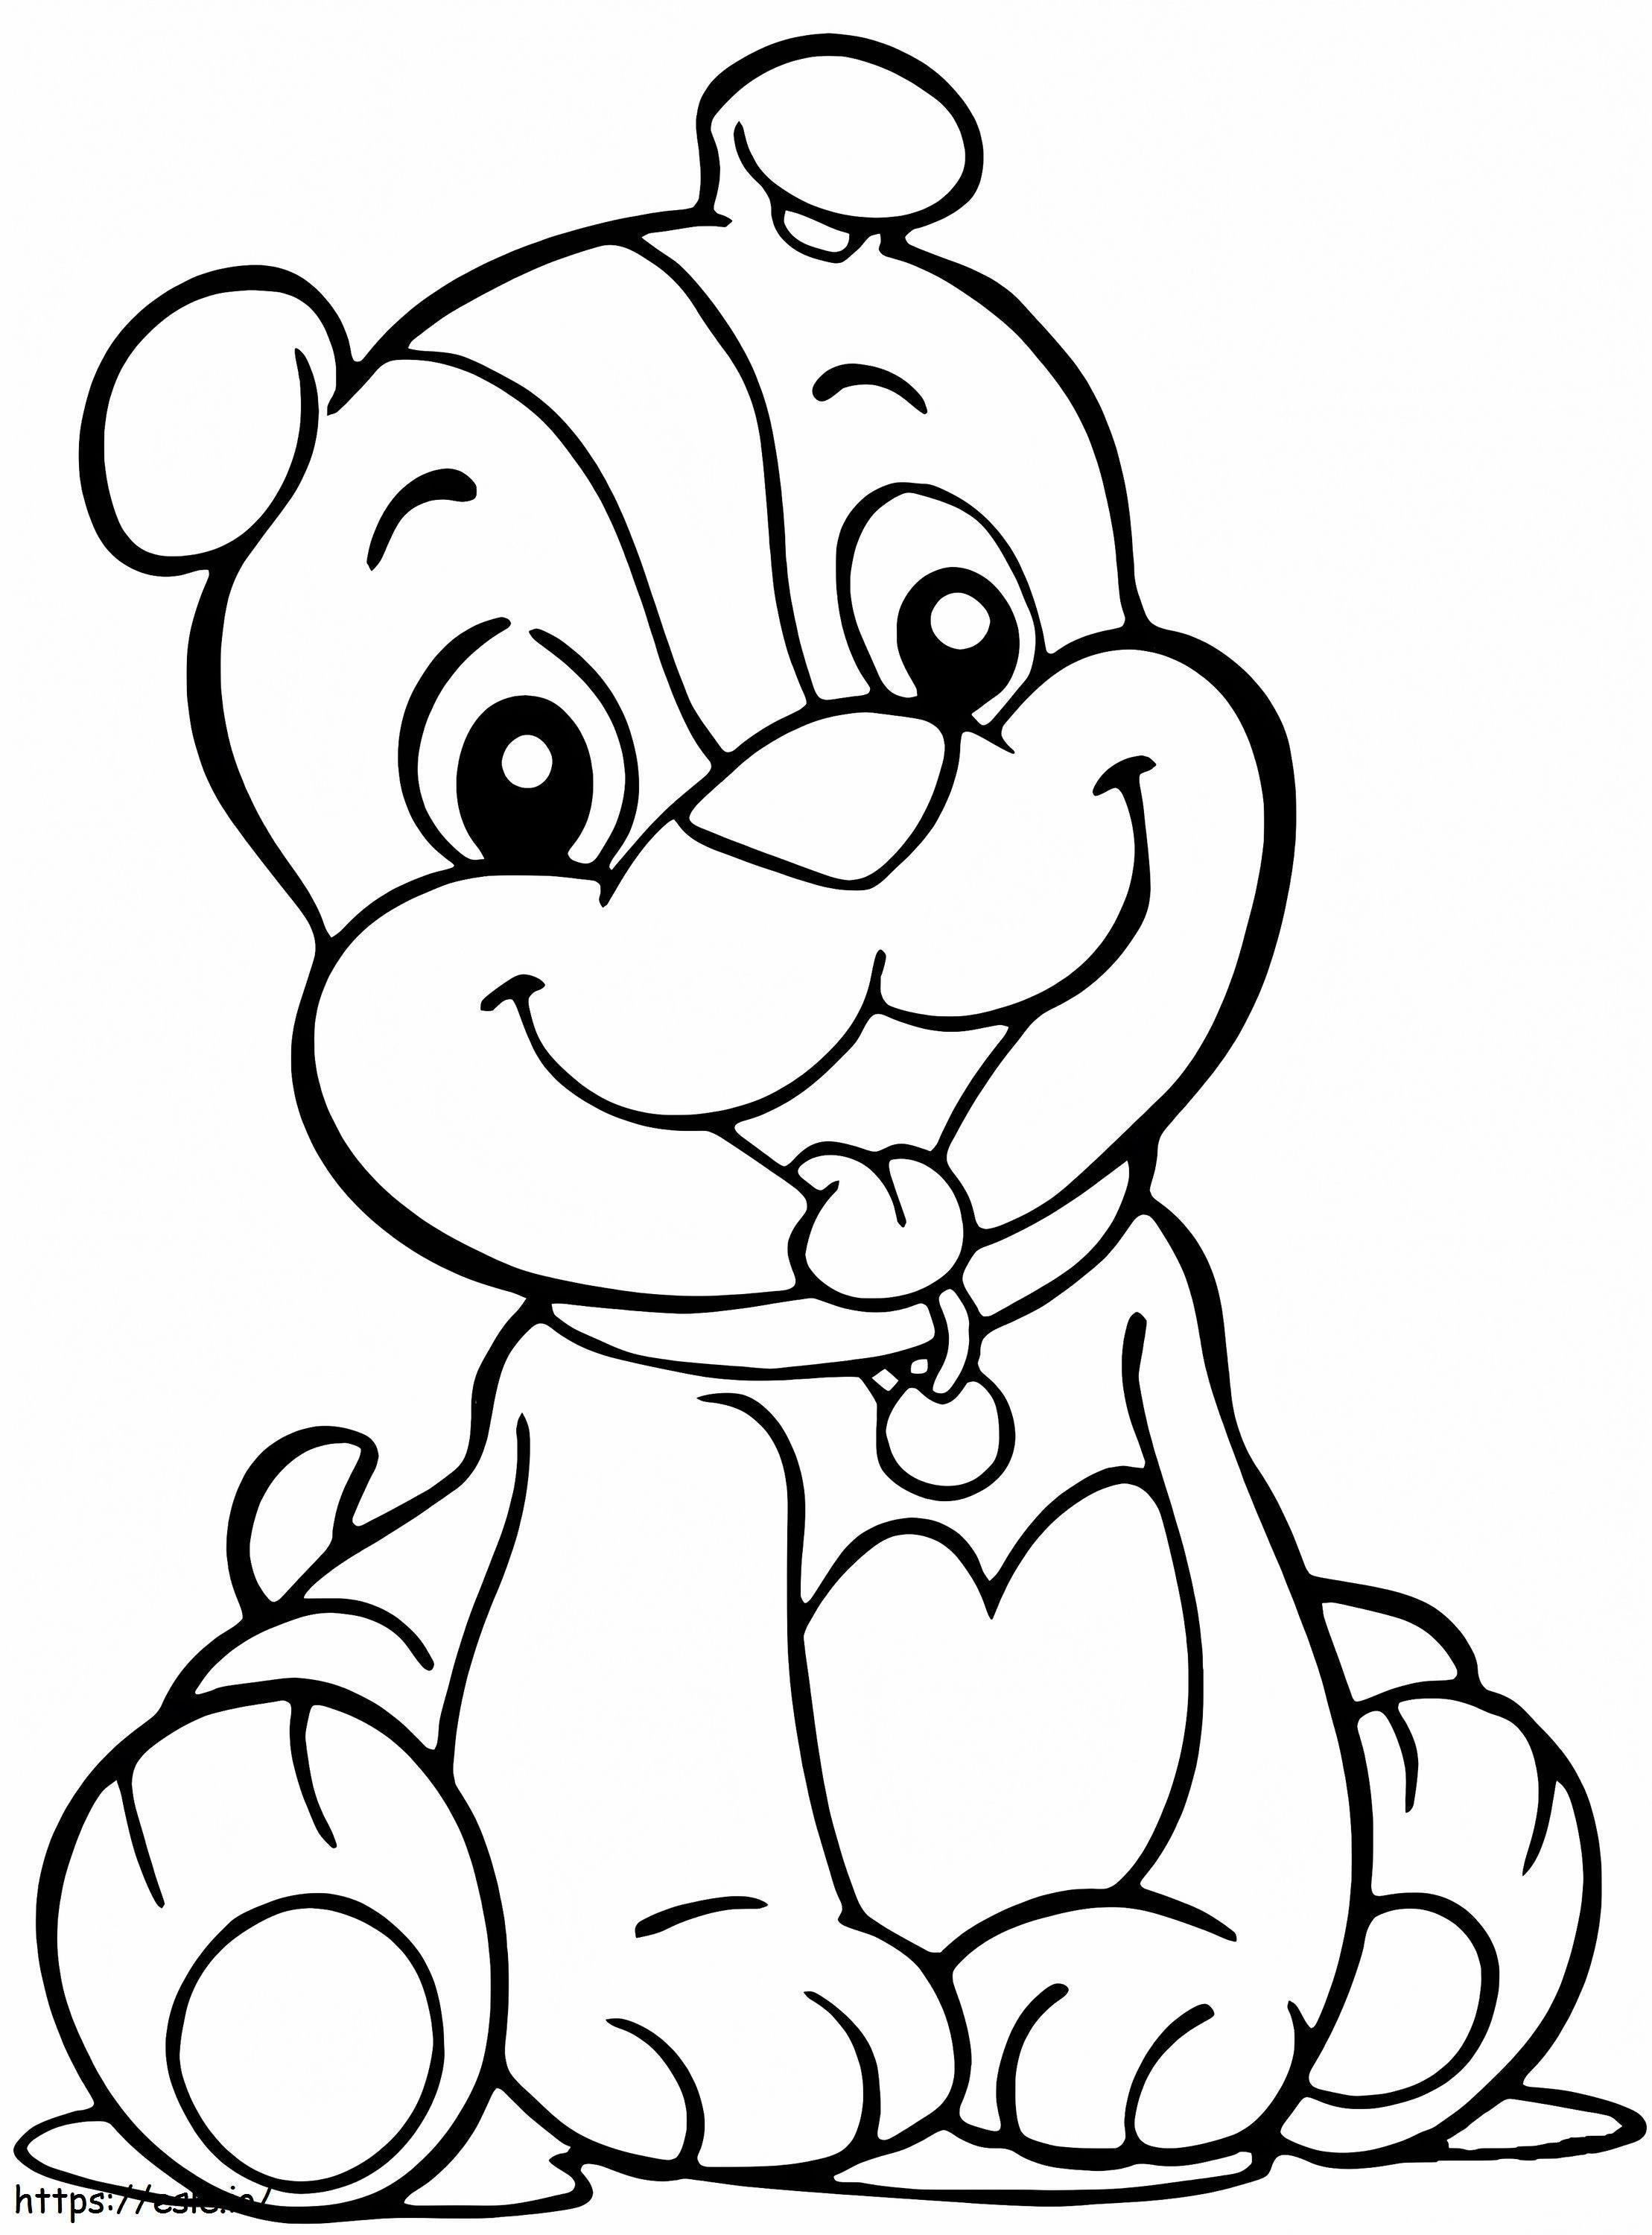 Rubble Paw Patrol coloring page